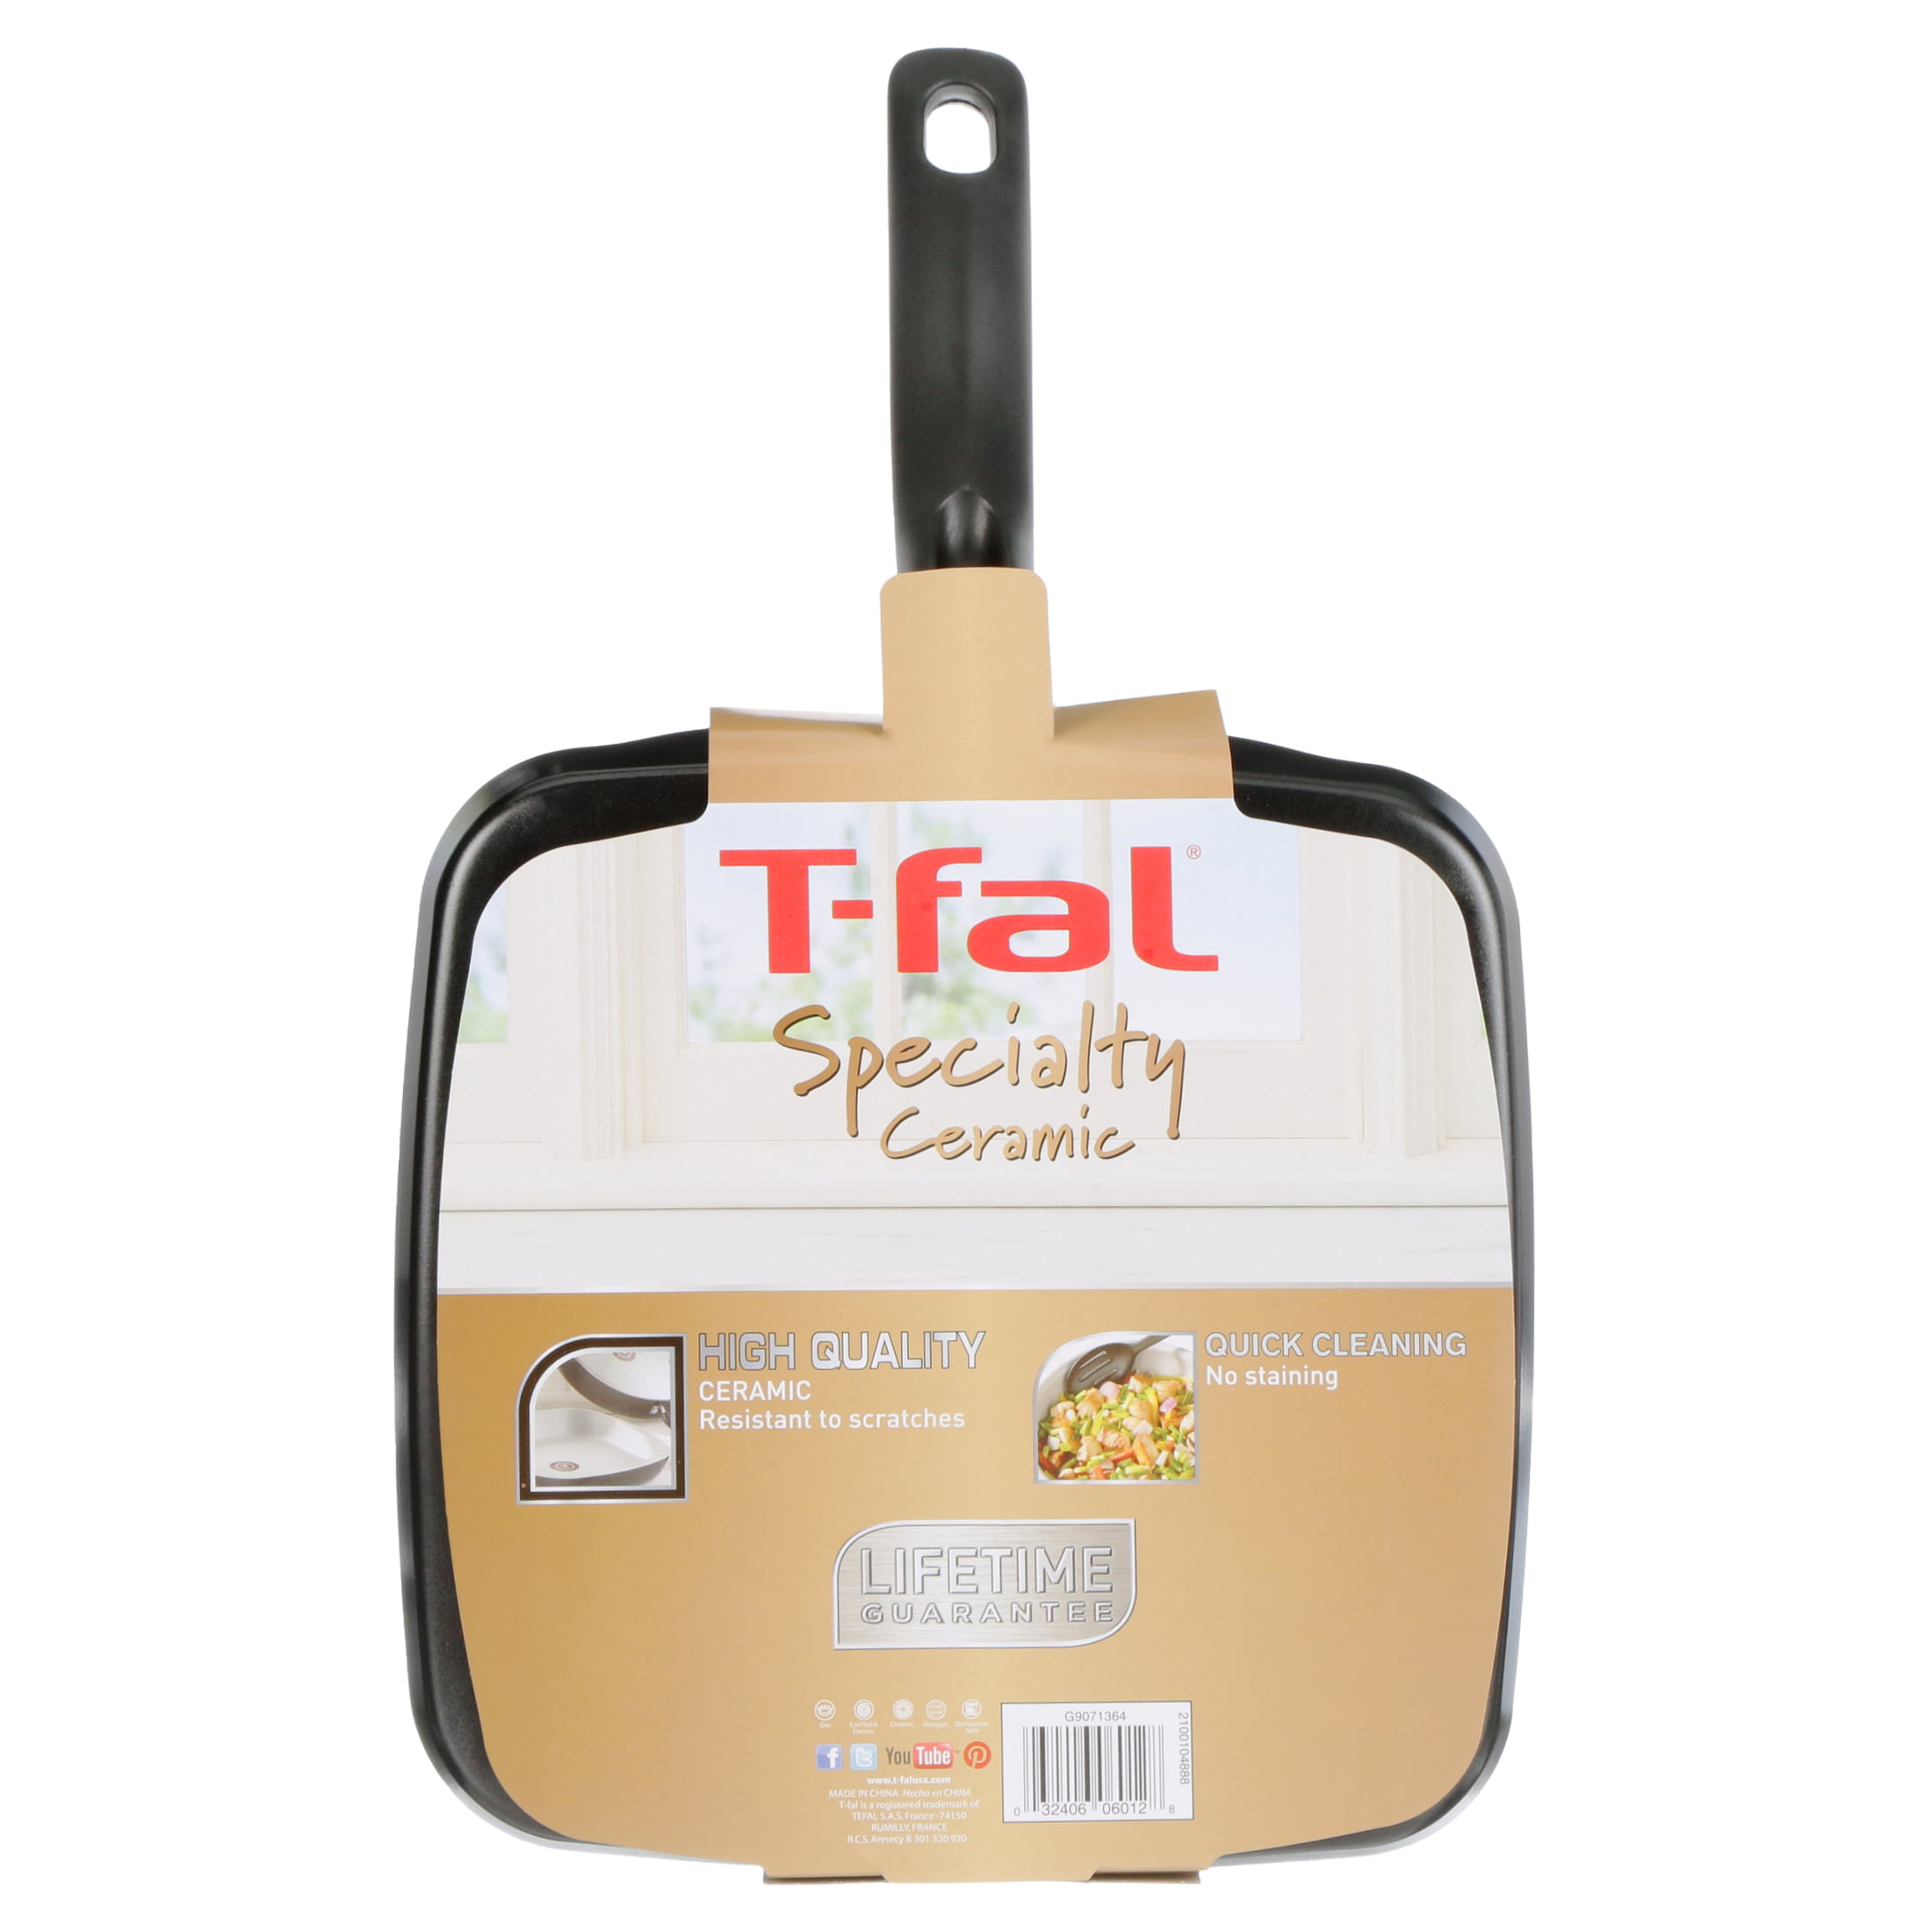 T-FAL Square Non-stick Grill Pan with Folding Handle, Pour Spout Made in  France